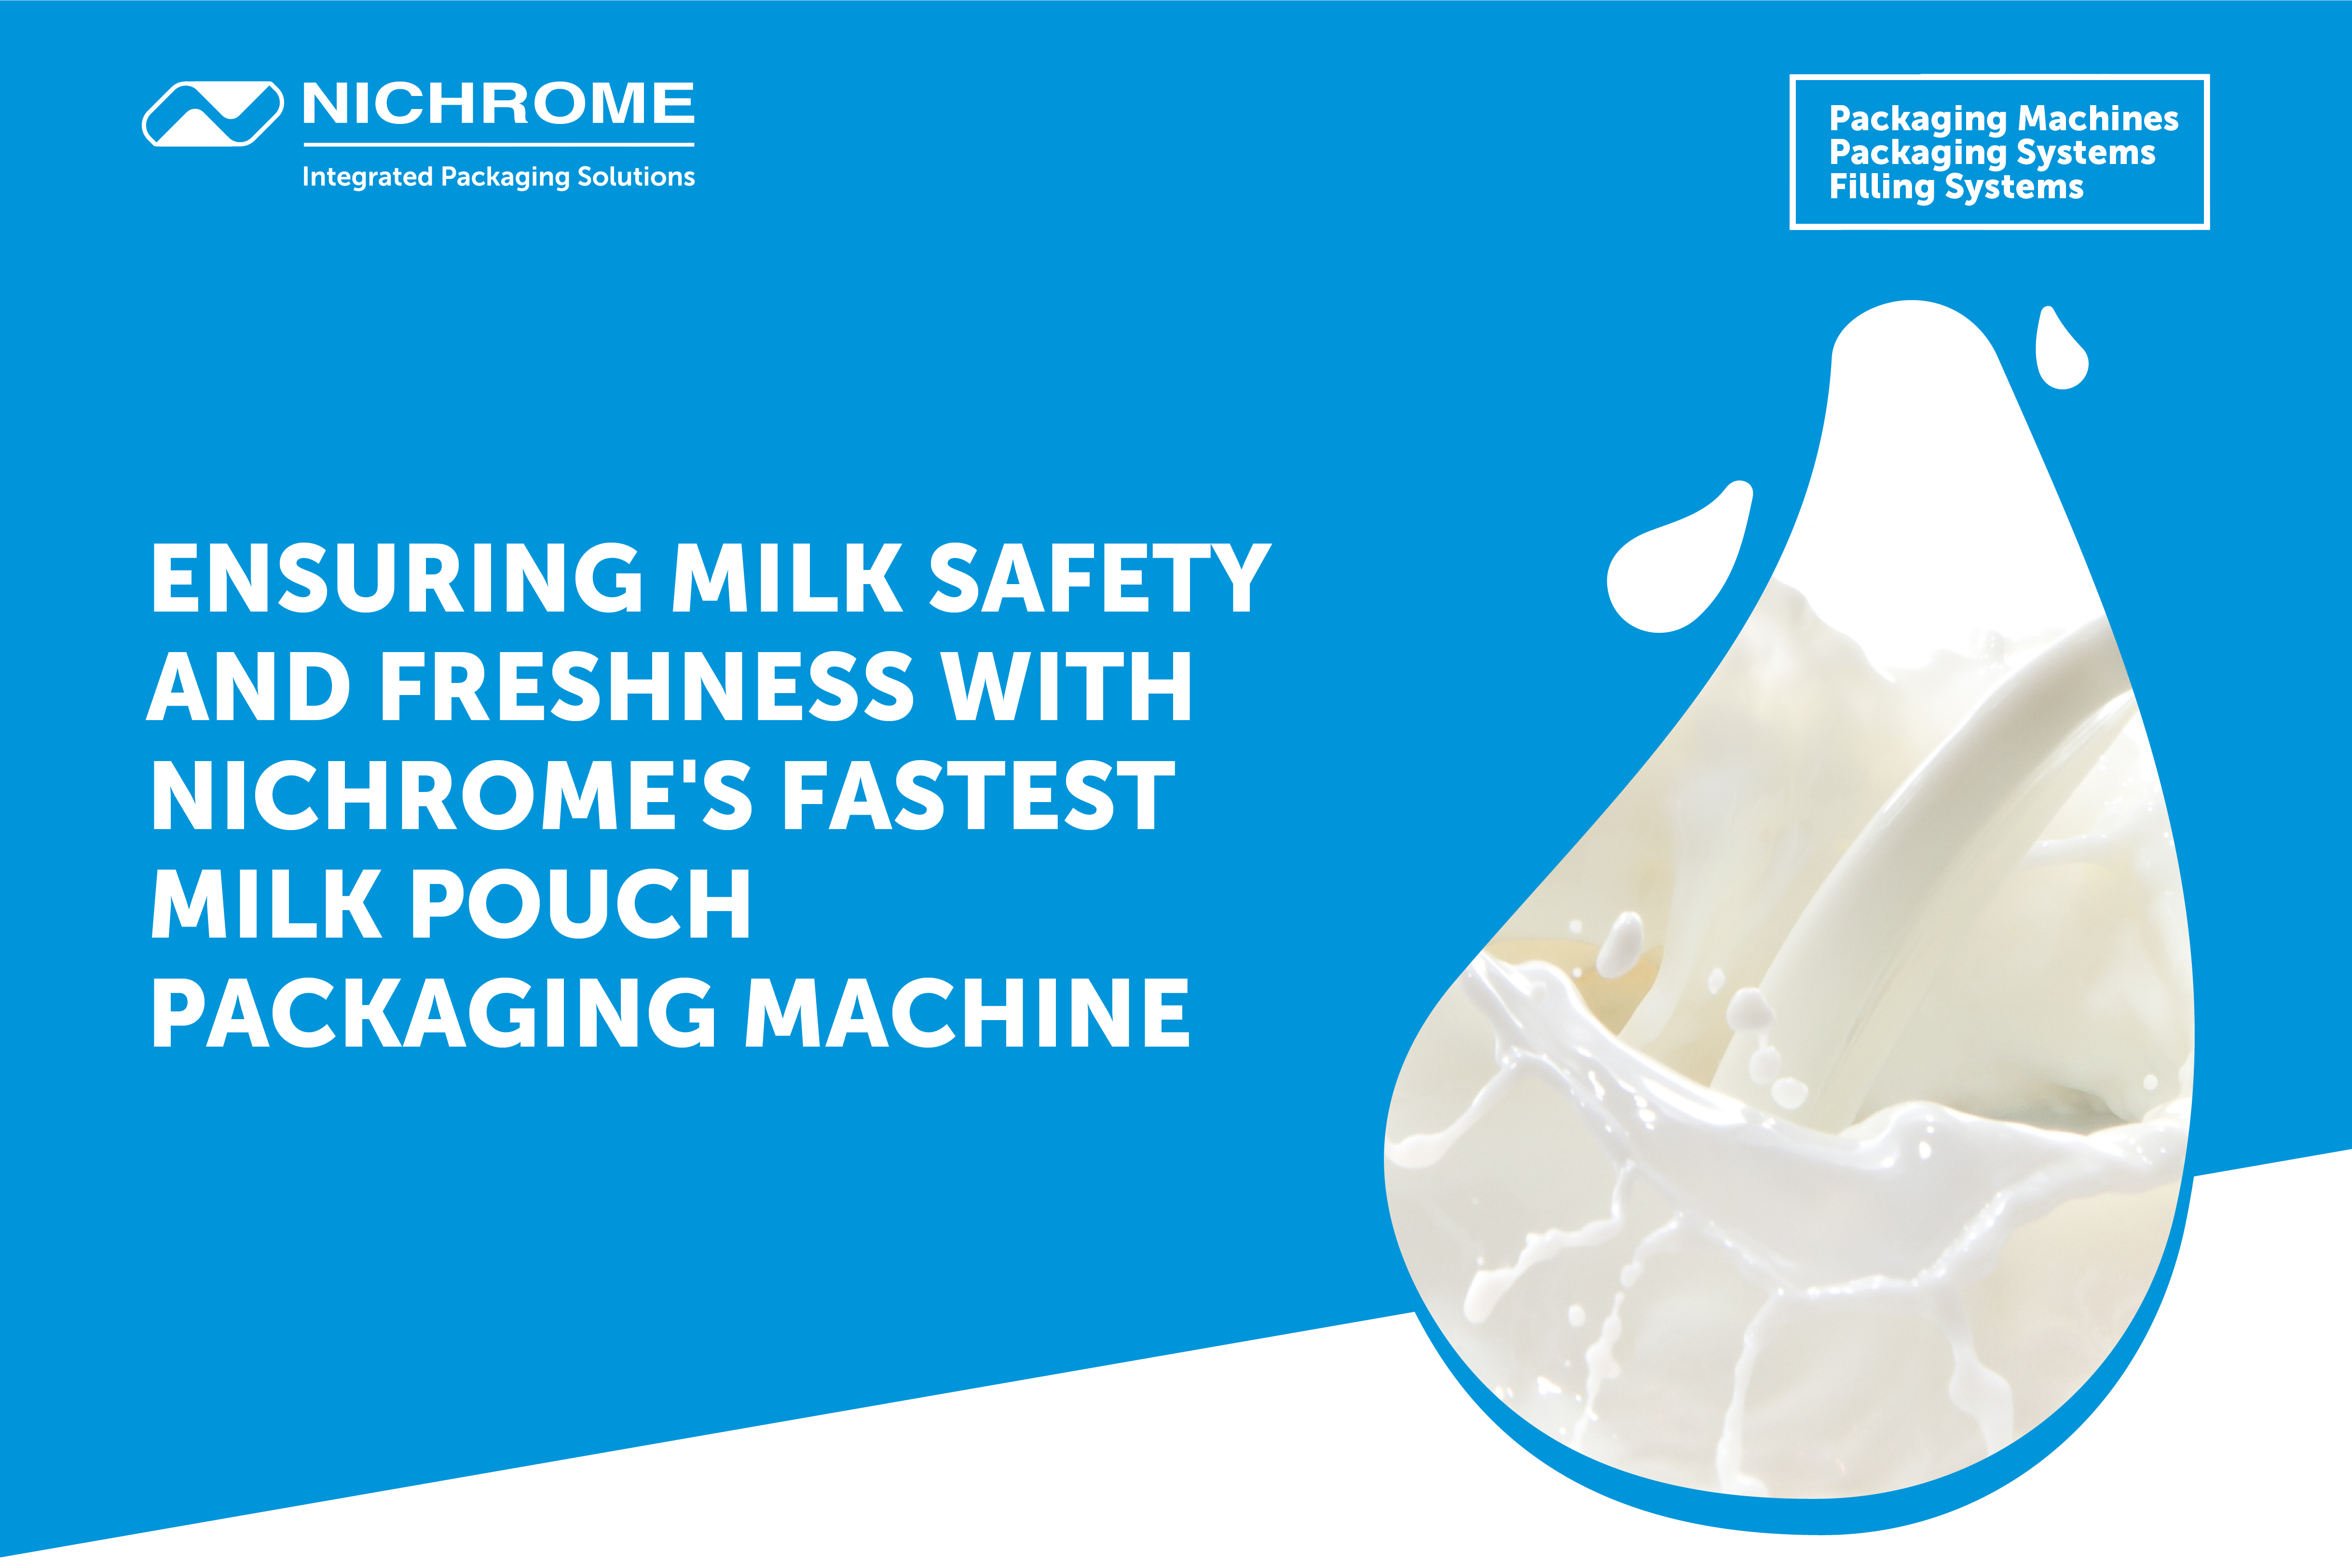 Ensuring Milk Safety and Freshness with Nichrome's Fastest Milk Pouch Packaging Machine